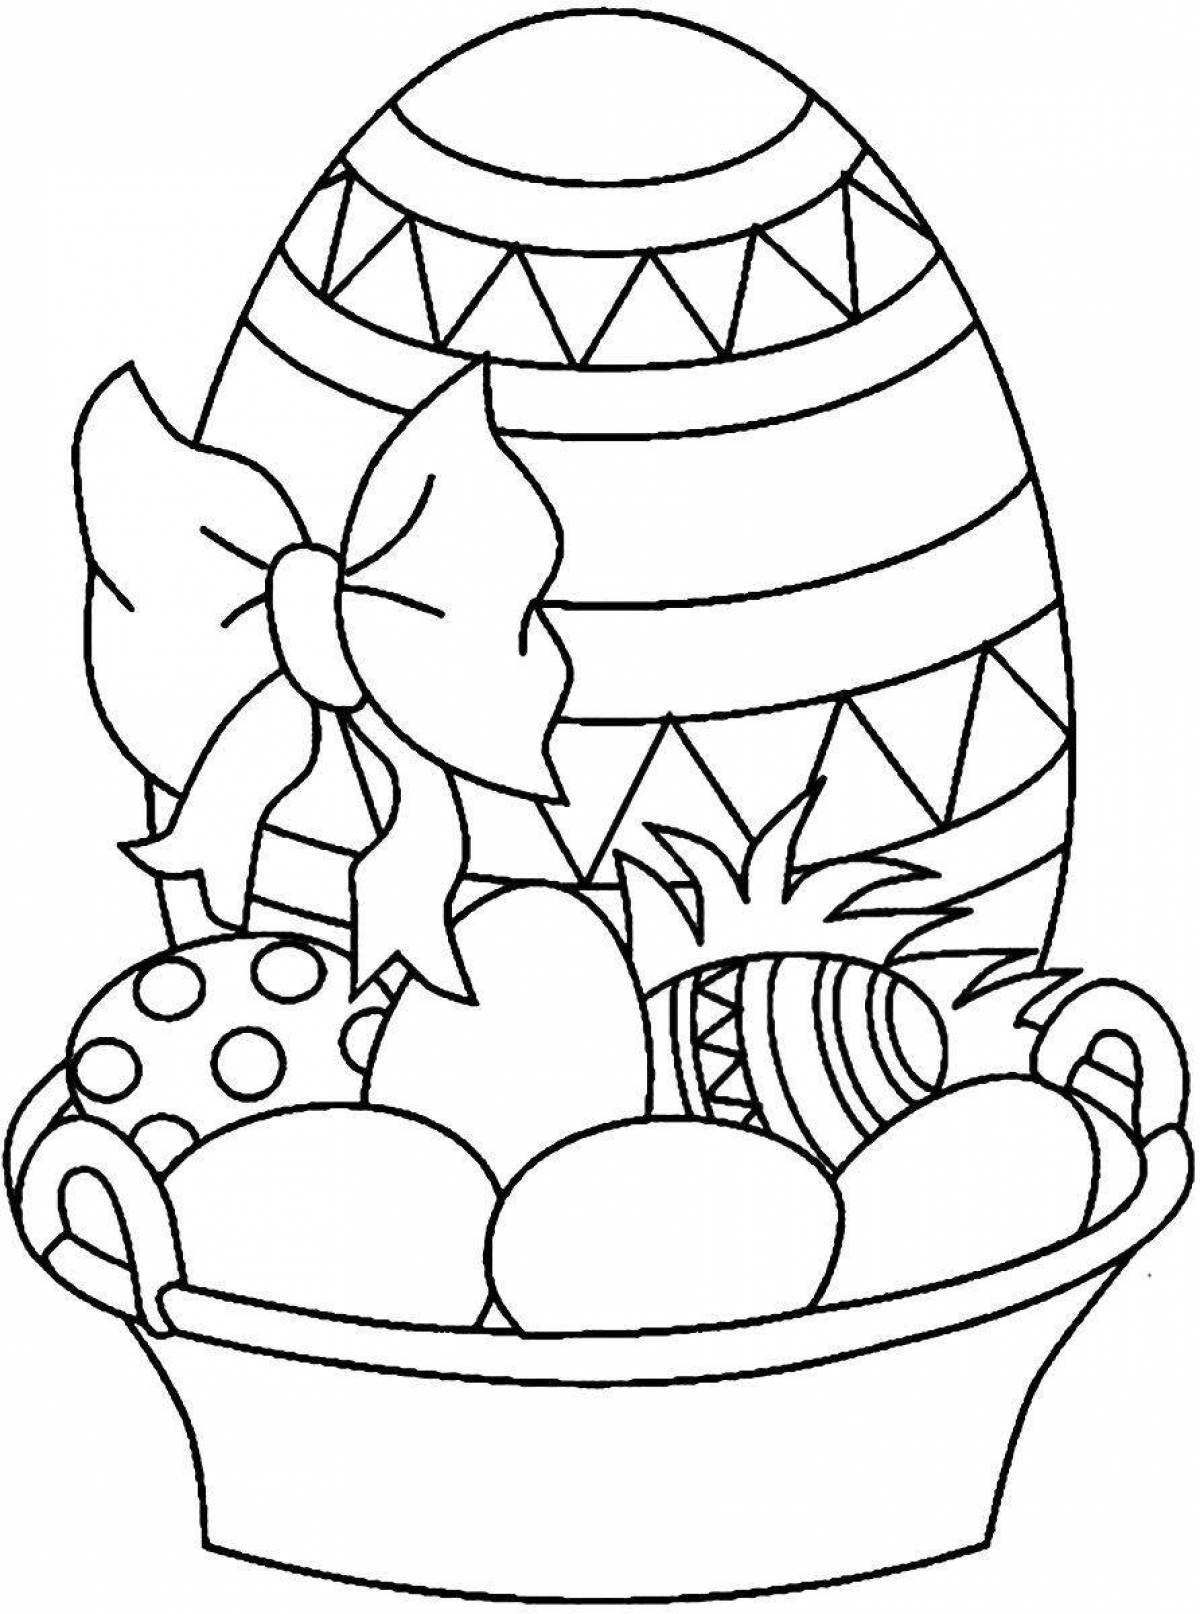 A fun Easter coloring book for kids